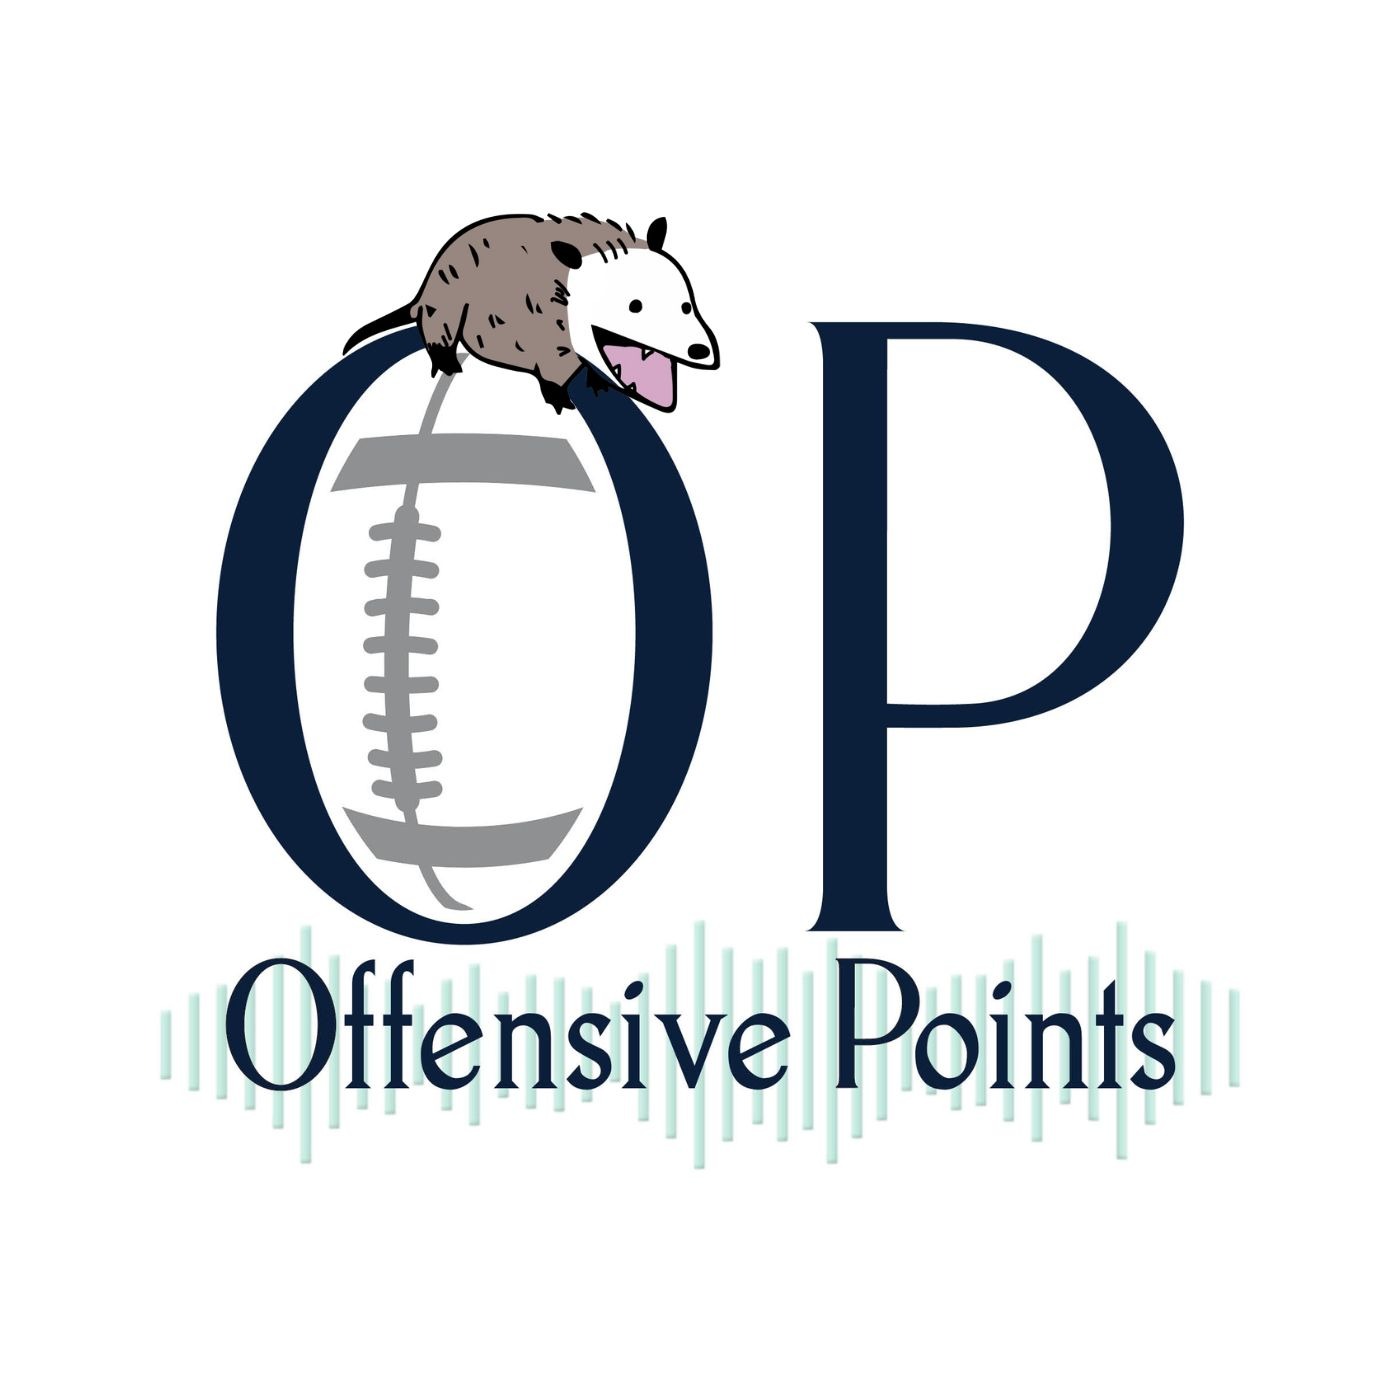 Offensive Points: Top 12 Dynasty Running Backs